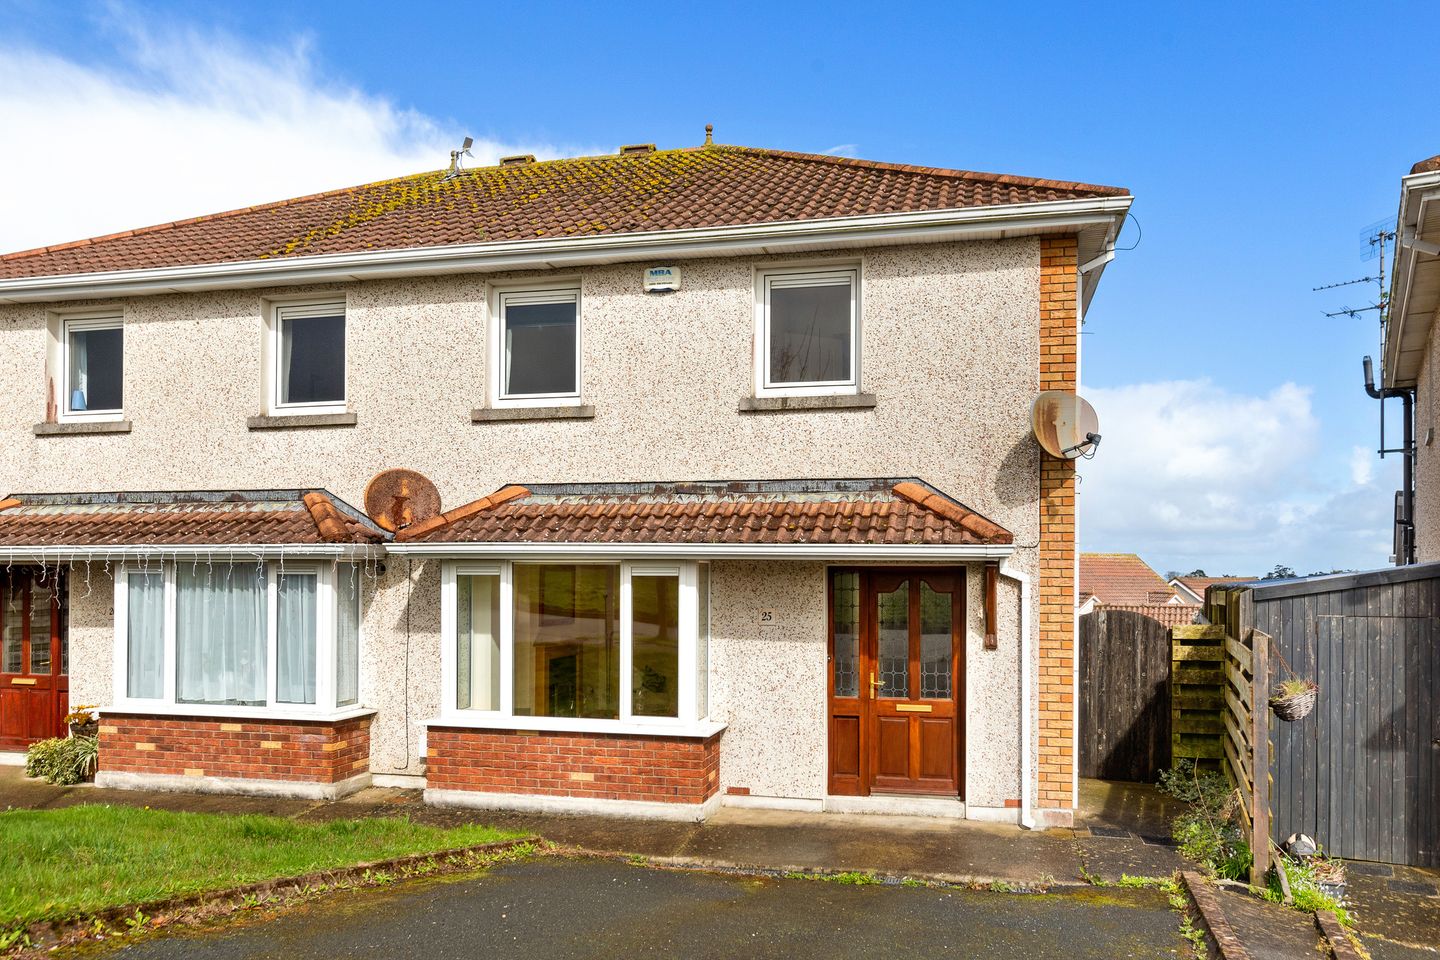 25 Broomhall Court, Rathnew, Co. Wicklow, A67HC97